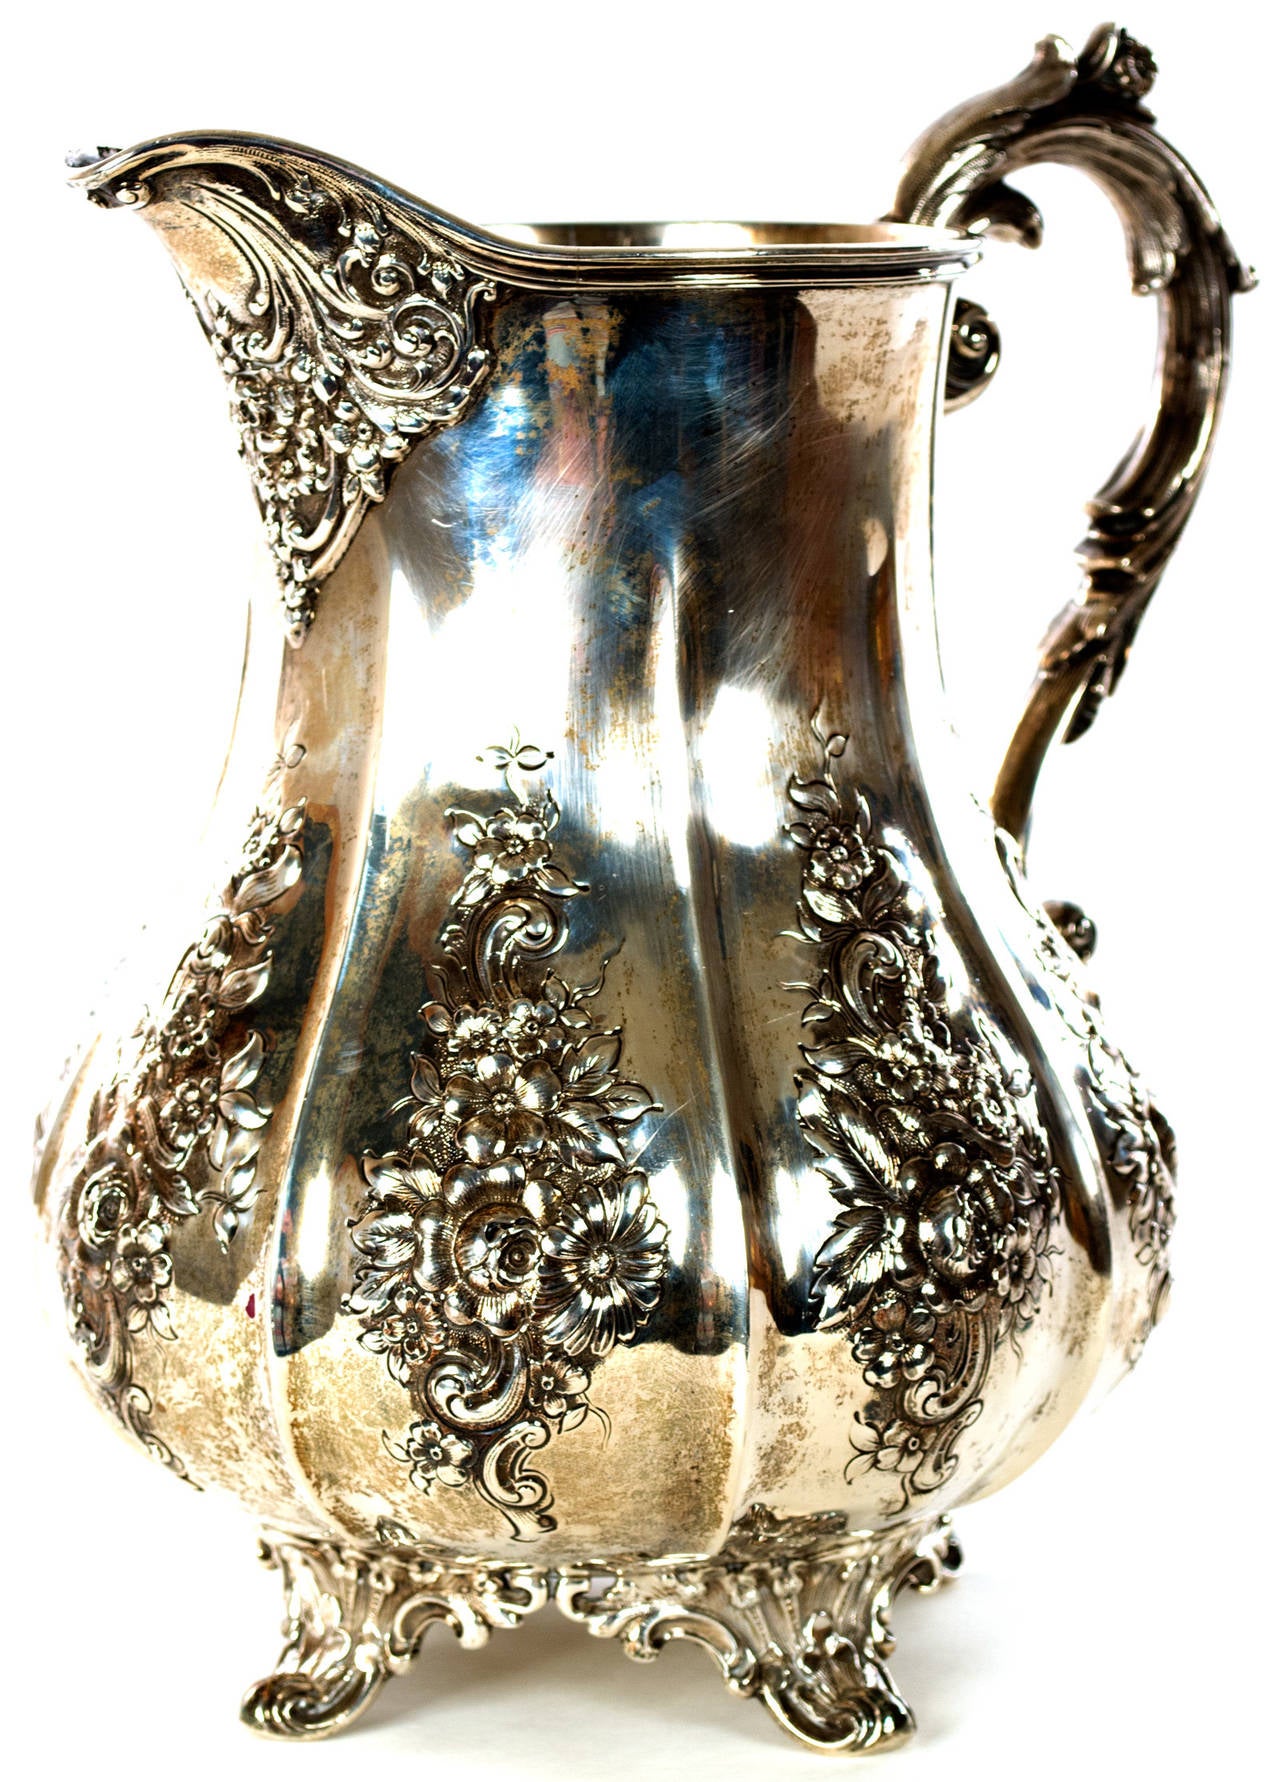 An early Tiffany and Company pitcher with Beaux-Arts-inspired shape and repoussé decorations of floral sprays on the body and a handle and feet formed by acanthus leaves, stamped 